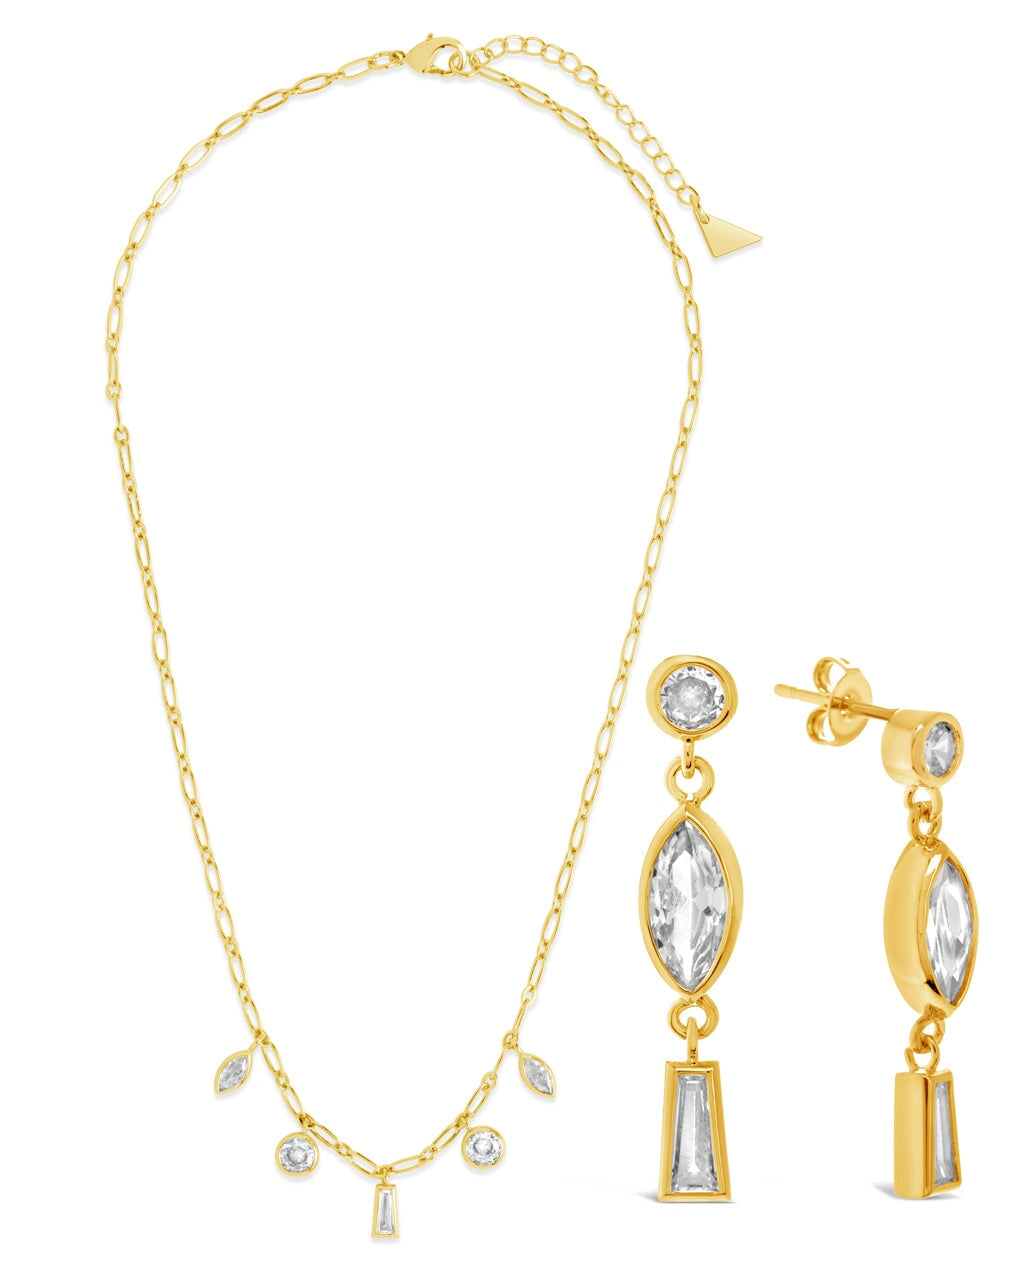 Suvi CZ Drop Earrings and Charm Necklace Set Bundles Sterling Forever 